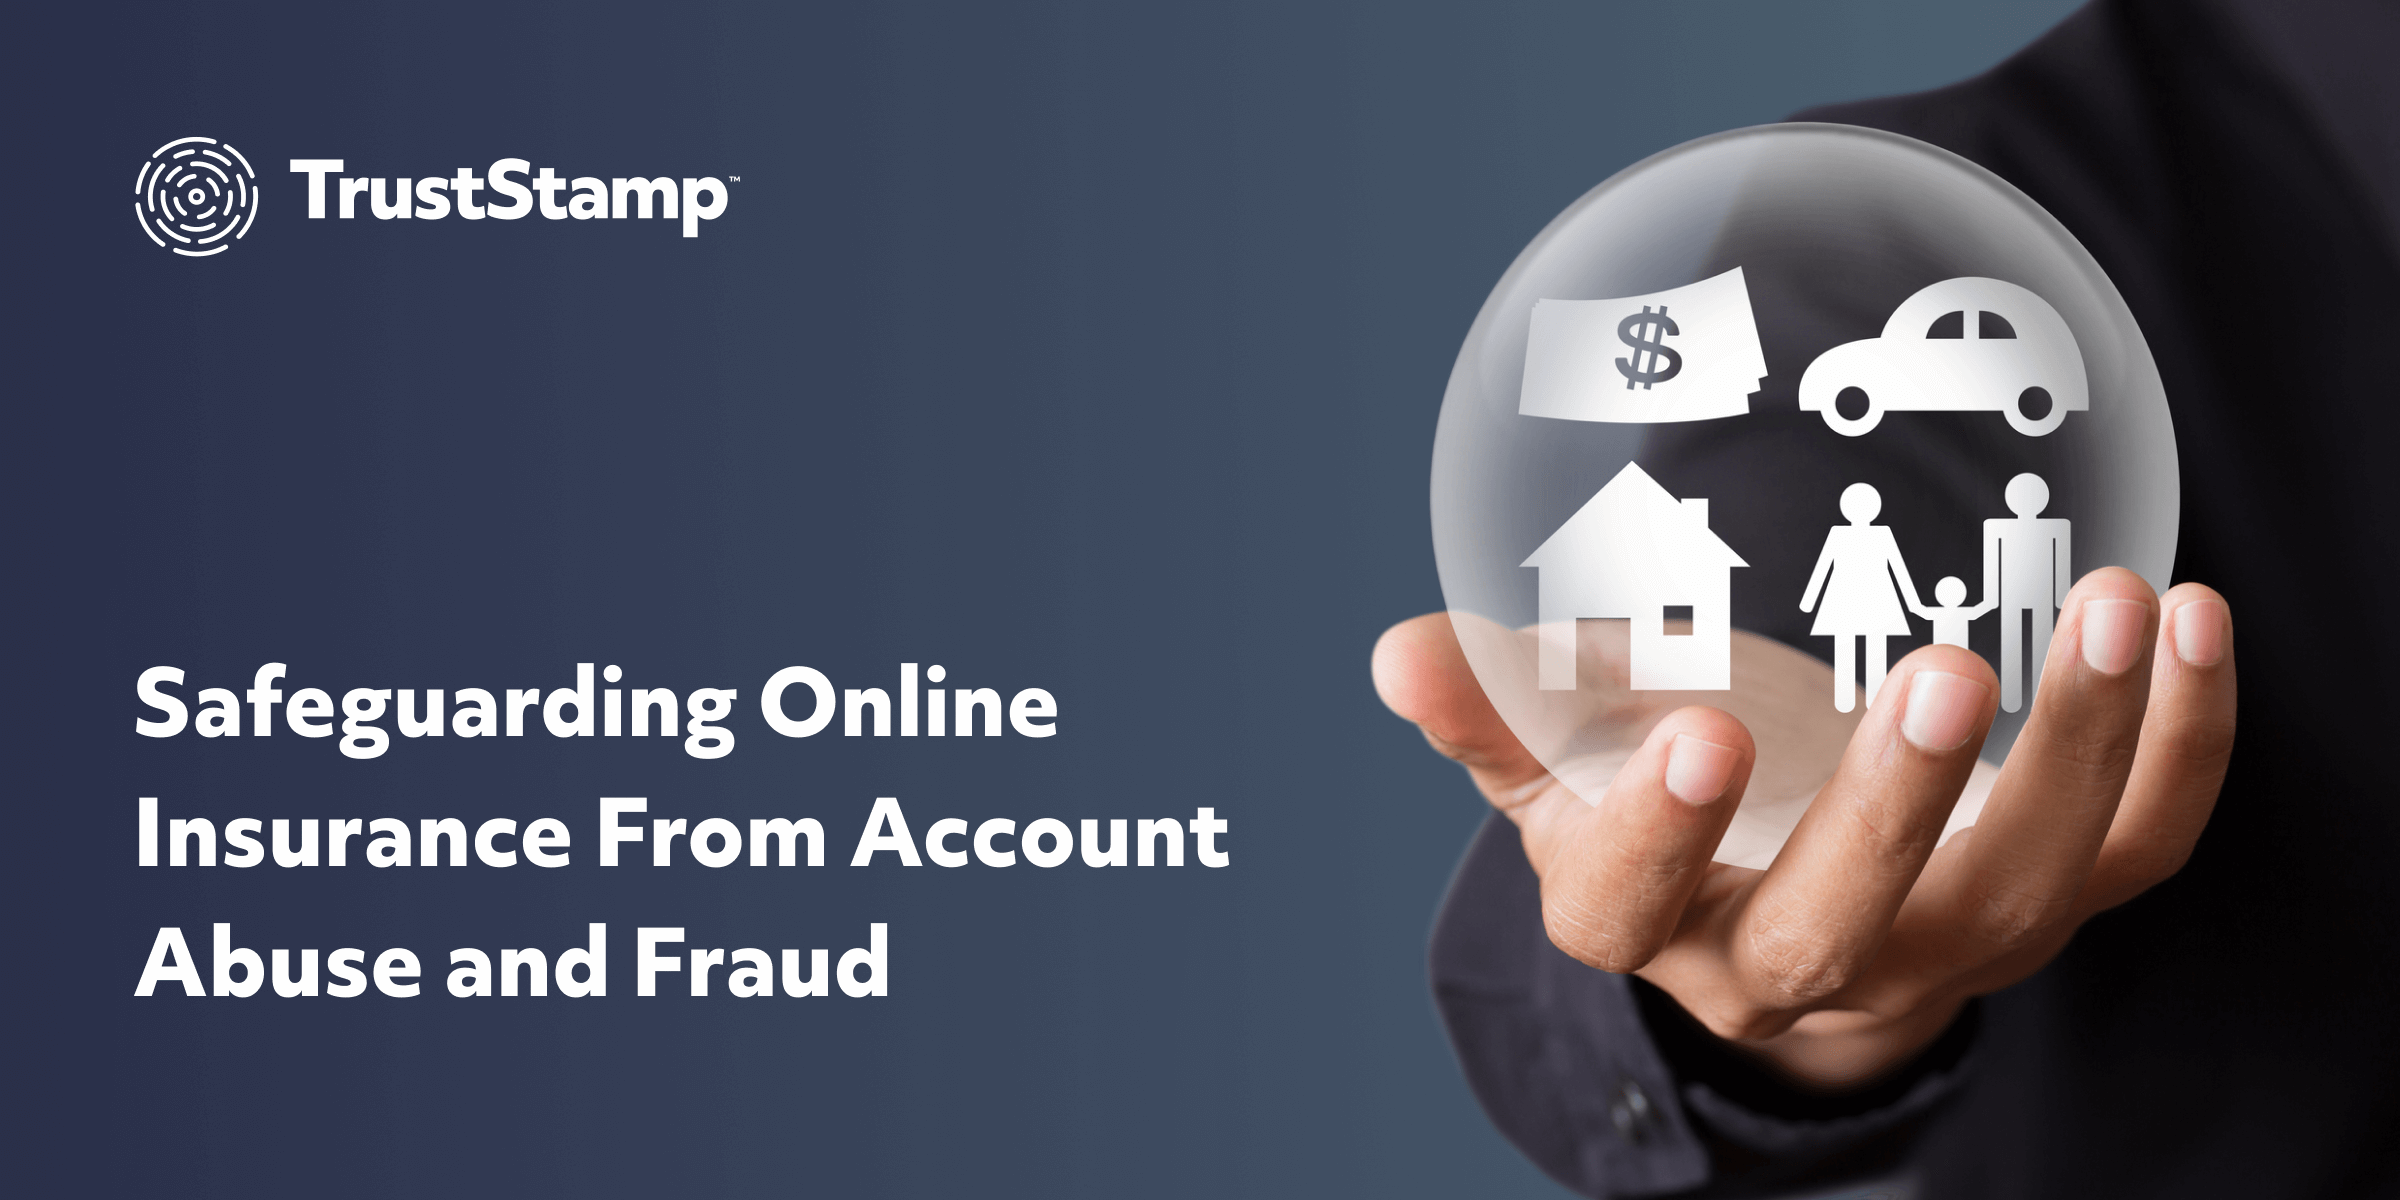 safeguarding-online-insurance-from-account-abuse-and-fraud-a-multi-layered-approach